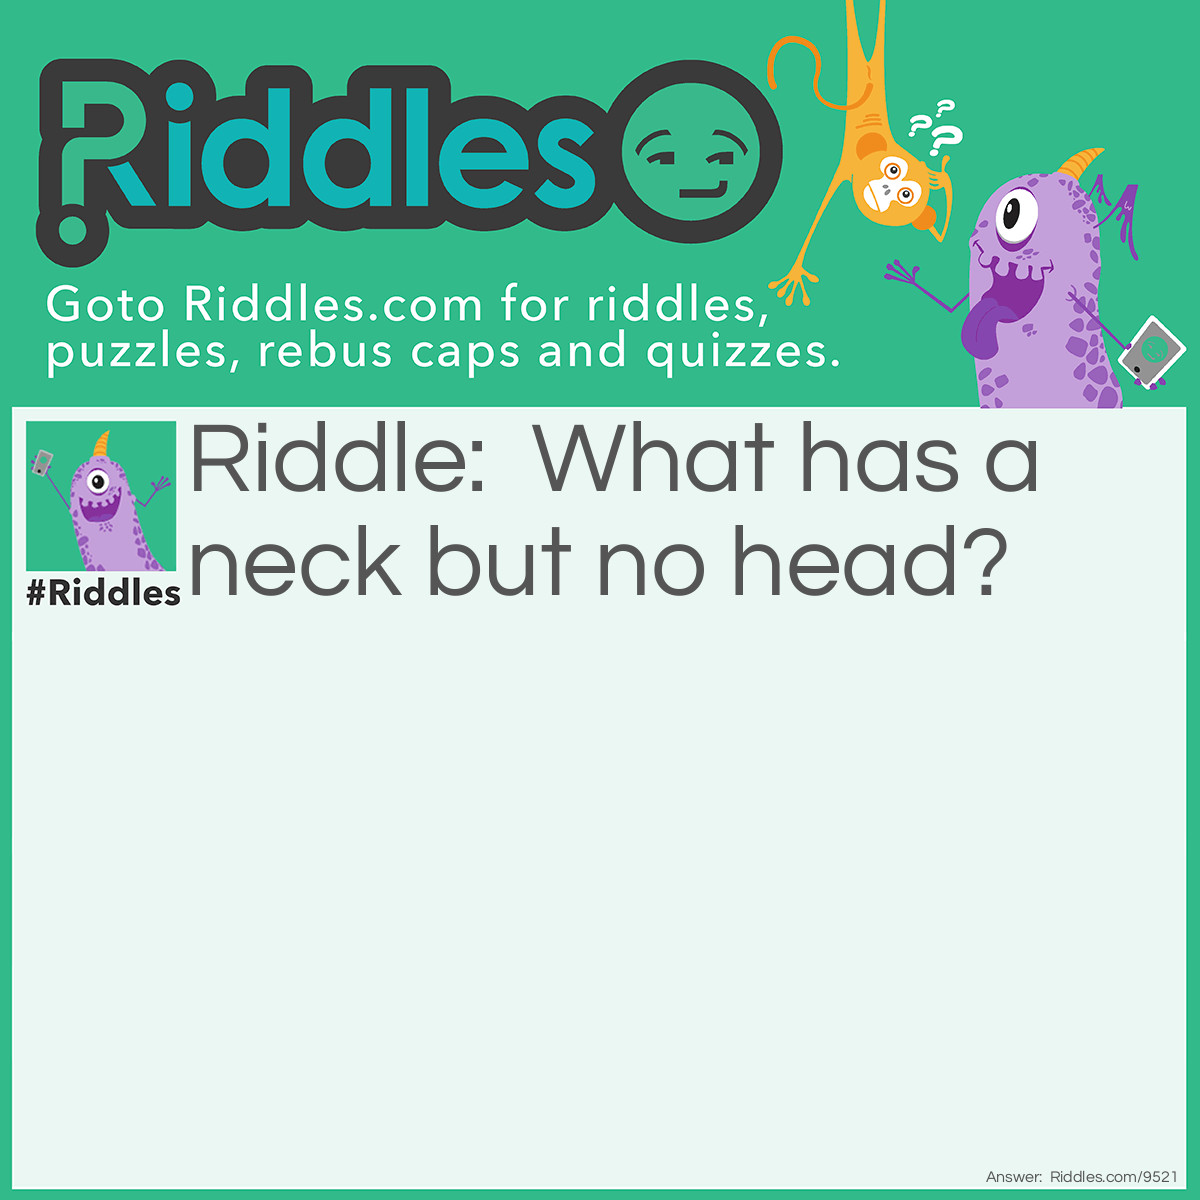 Riddle: What has a neck but no head? Answer: A shirt.